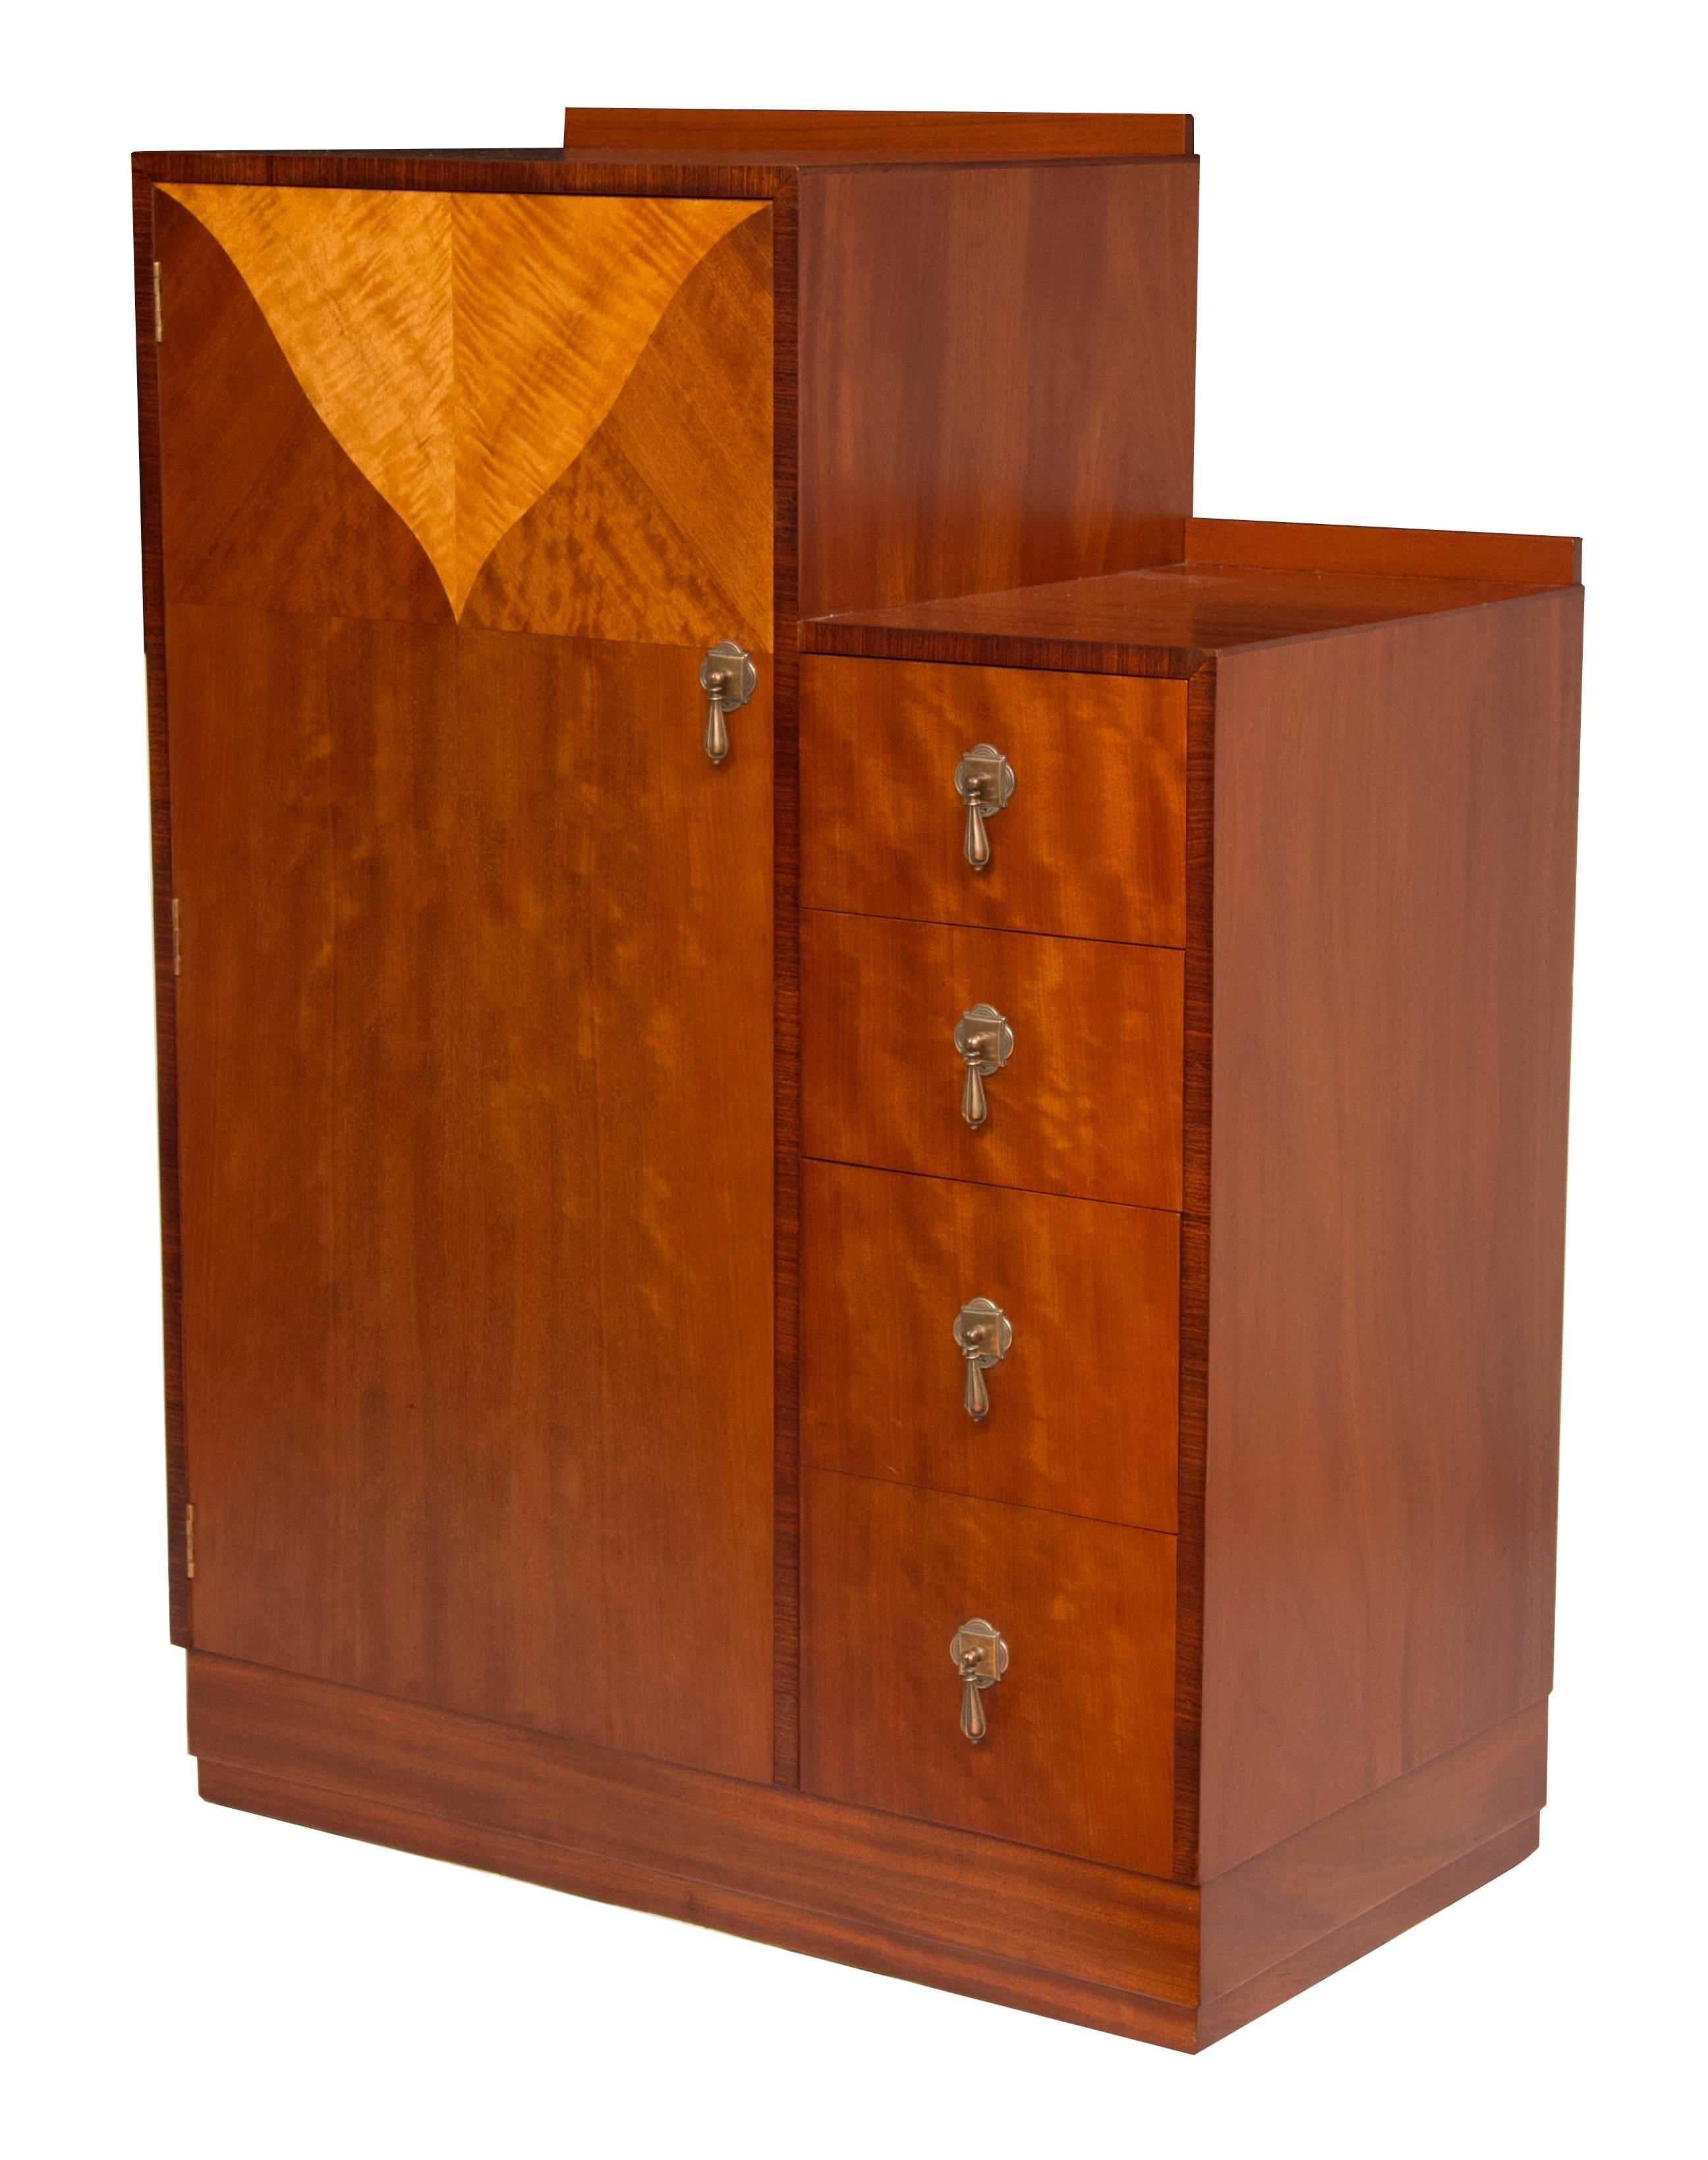 Art Deco gentleman’s Wardrobe.
Art Deco tallboy by Maple and Co, fine quality to this stunning gentleman’s wardrobe, beautiful satin walnut with satin maple detail and bronze handles.
Measures: 114 cm h at the front 117 cm h at the back 84 cm w 46